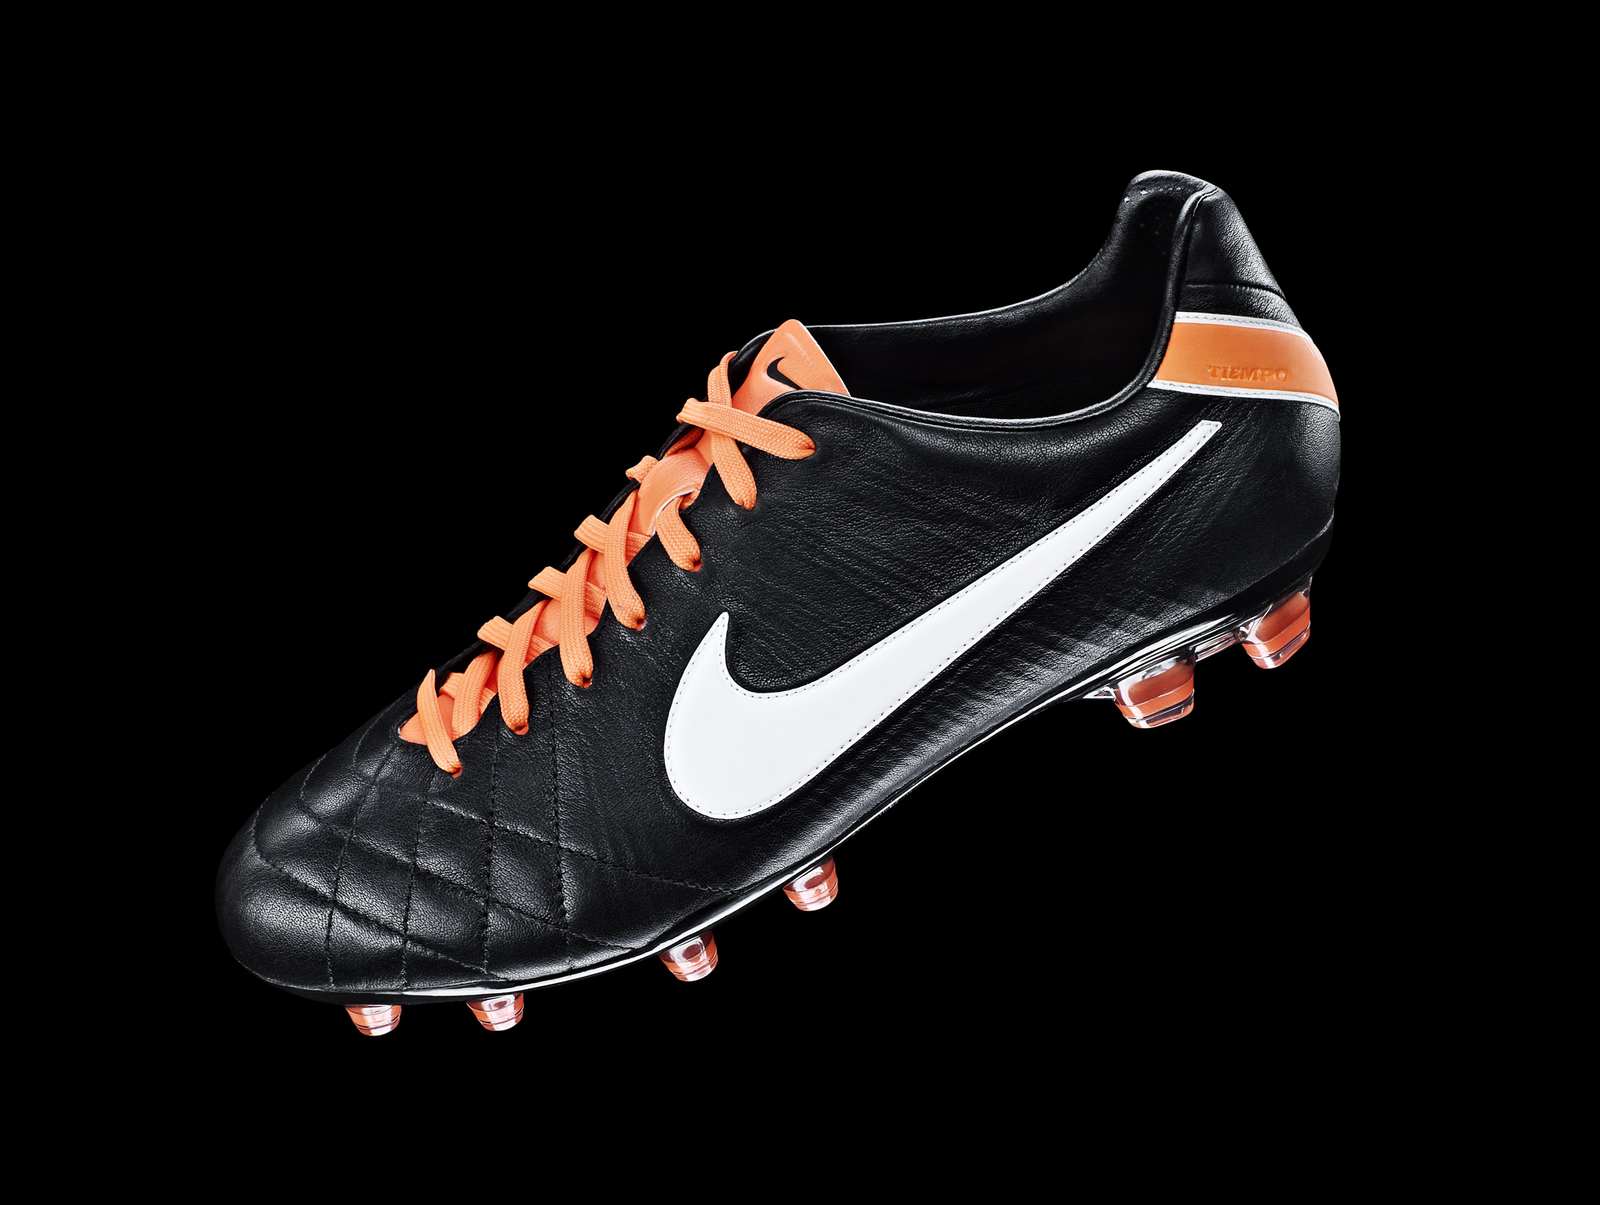 Colorway Leaked: Nike to Release Nike Tiempo 4 2019 Remake Boots - Footy Headlines